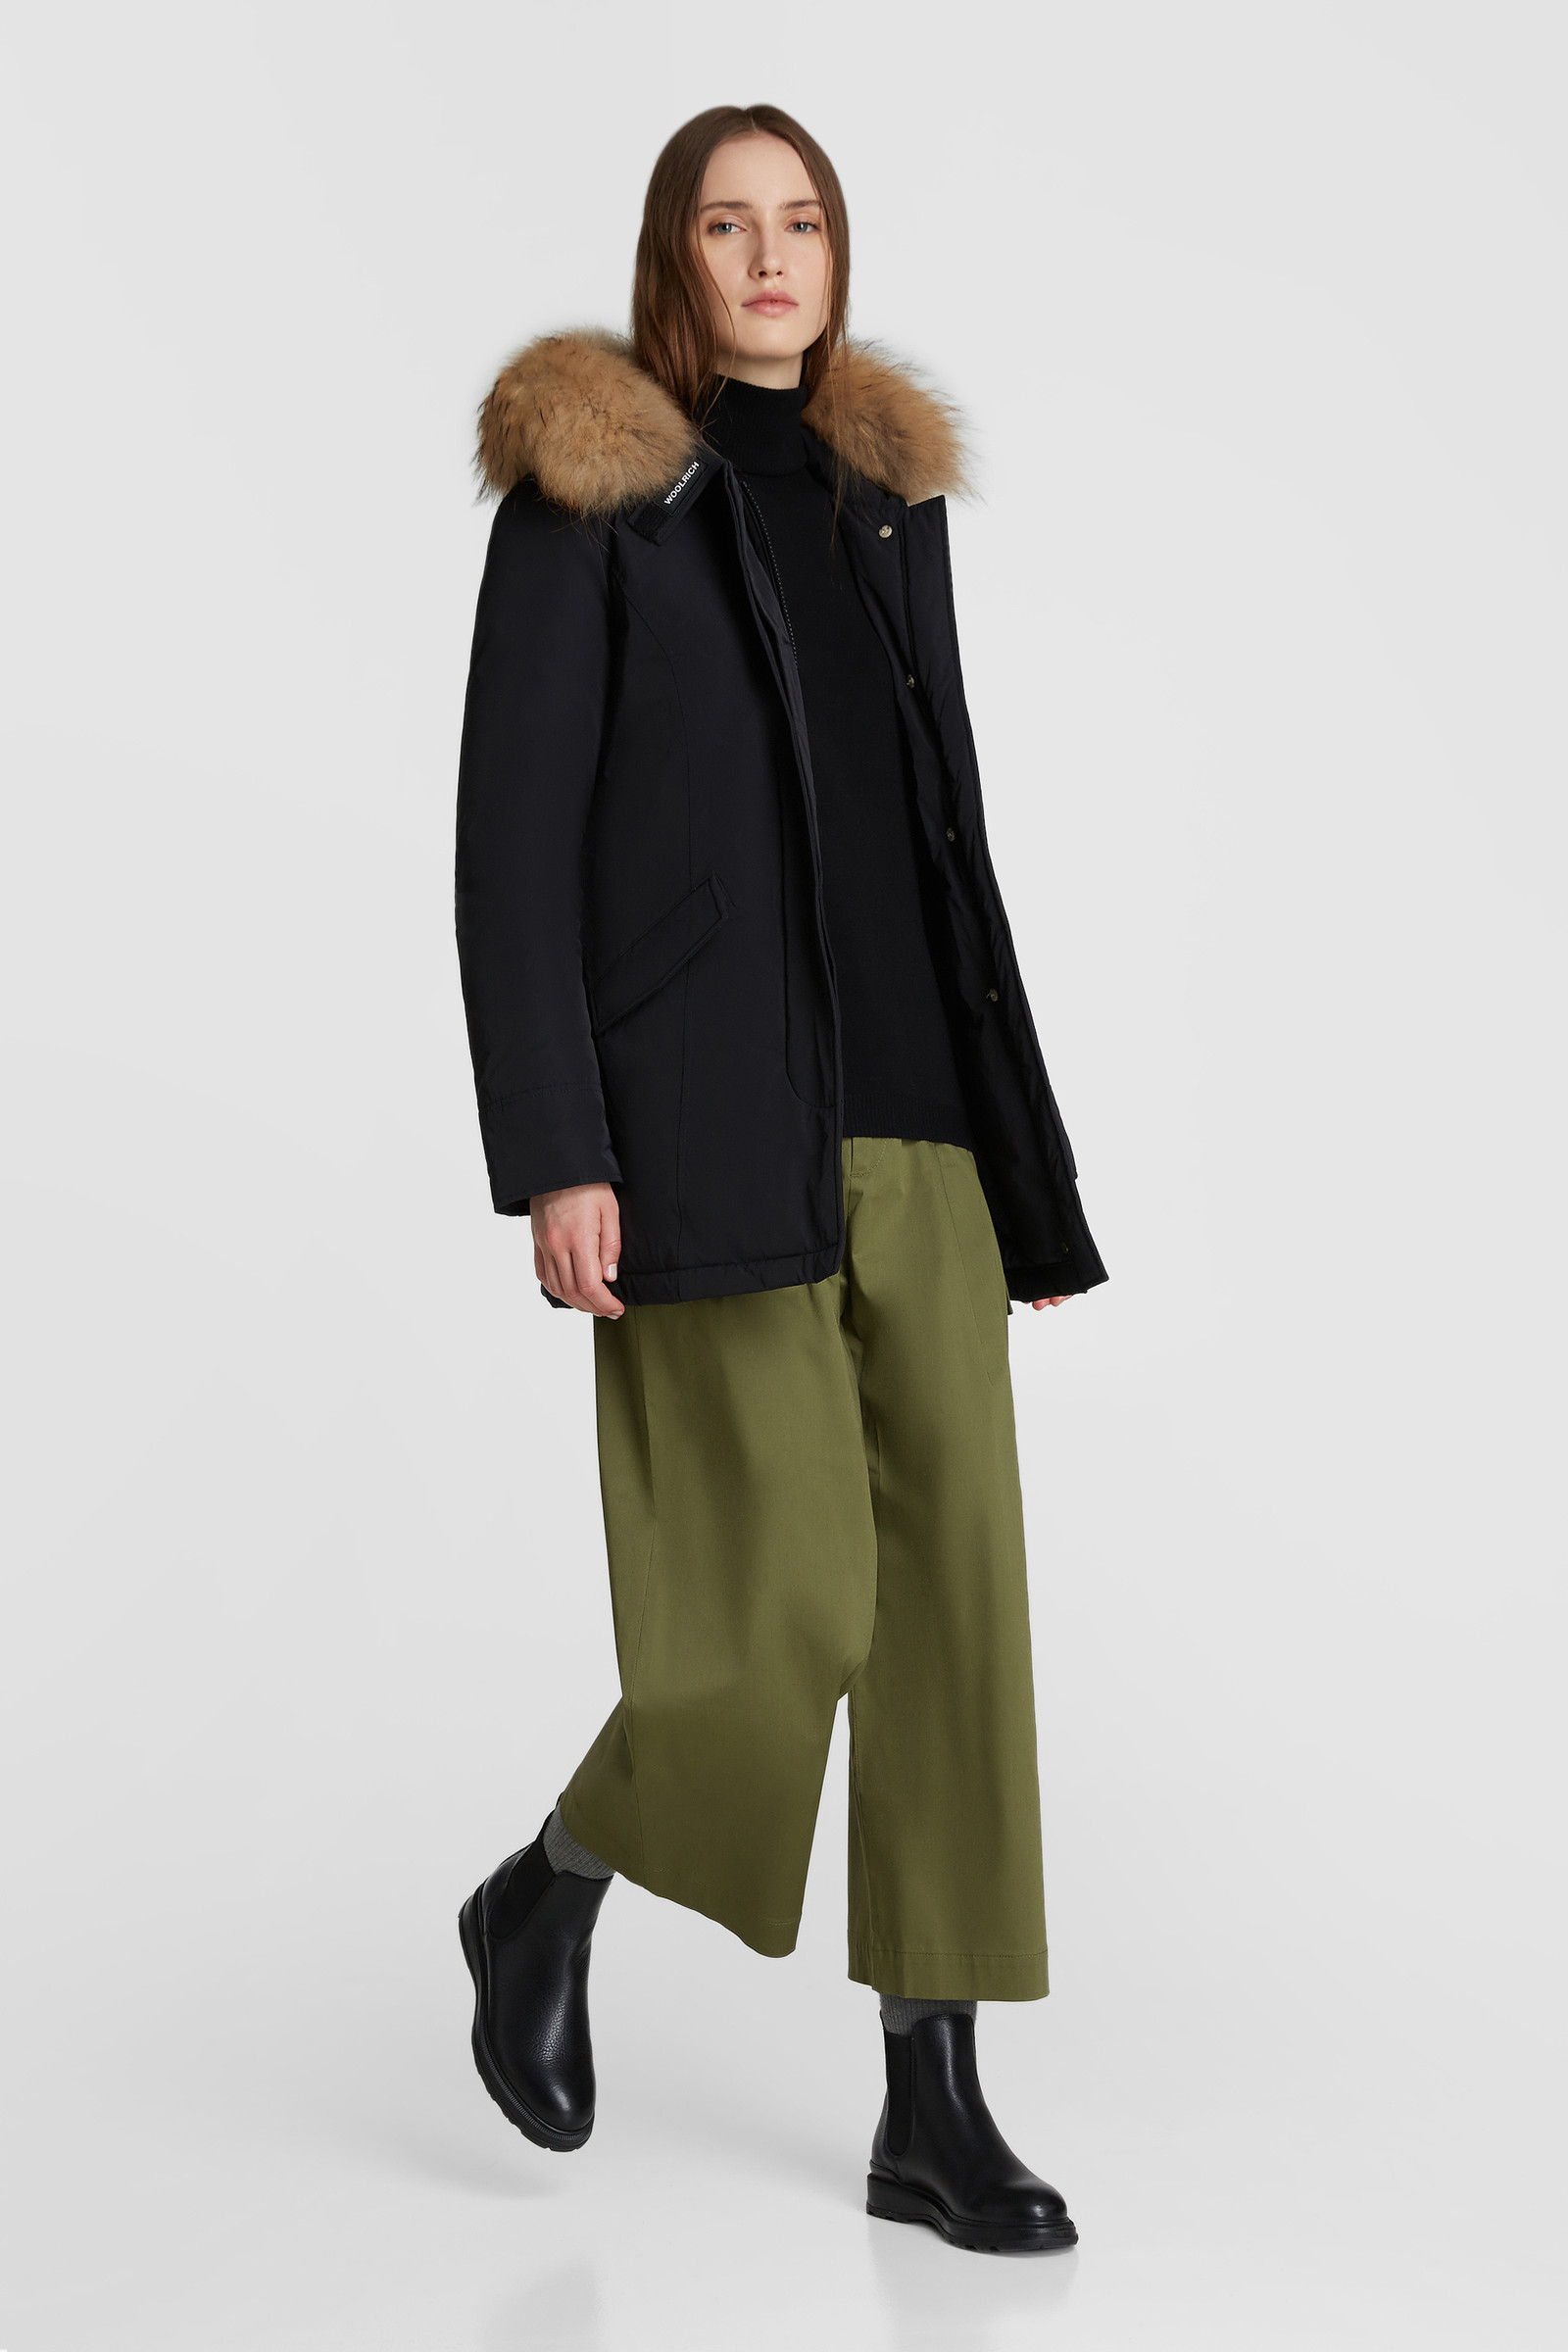 Women's Luxury Arctic Parka with Fur Black | Woolrich USA